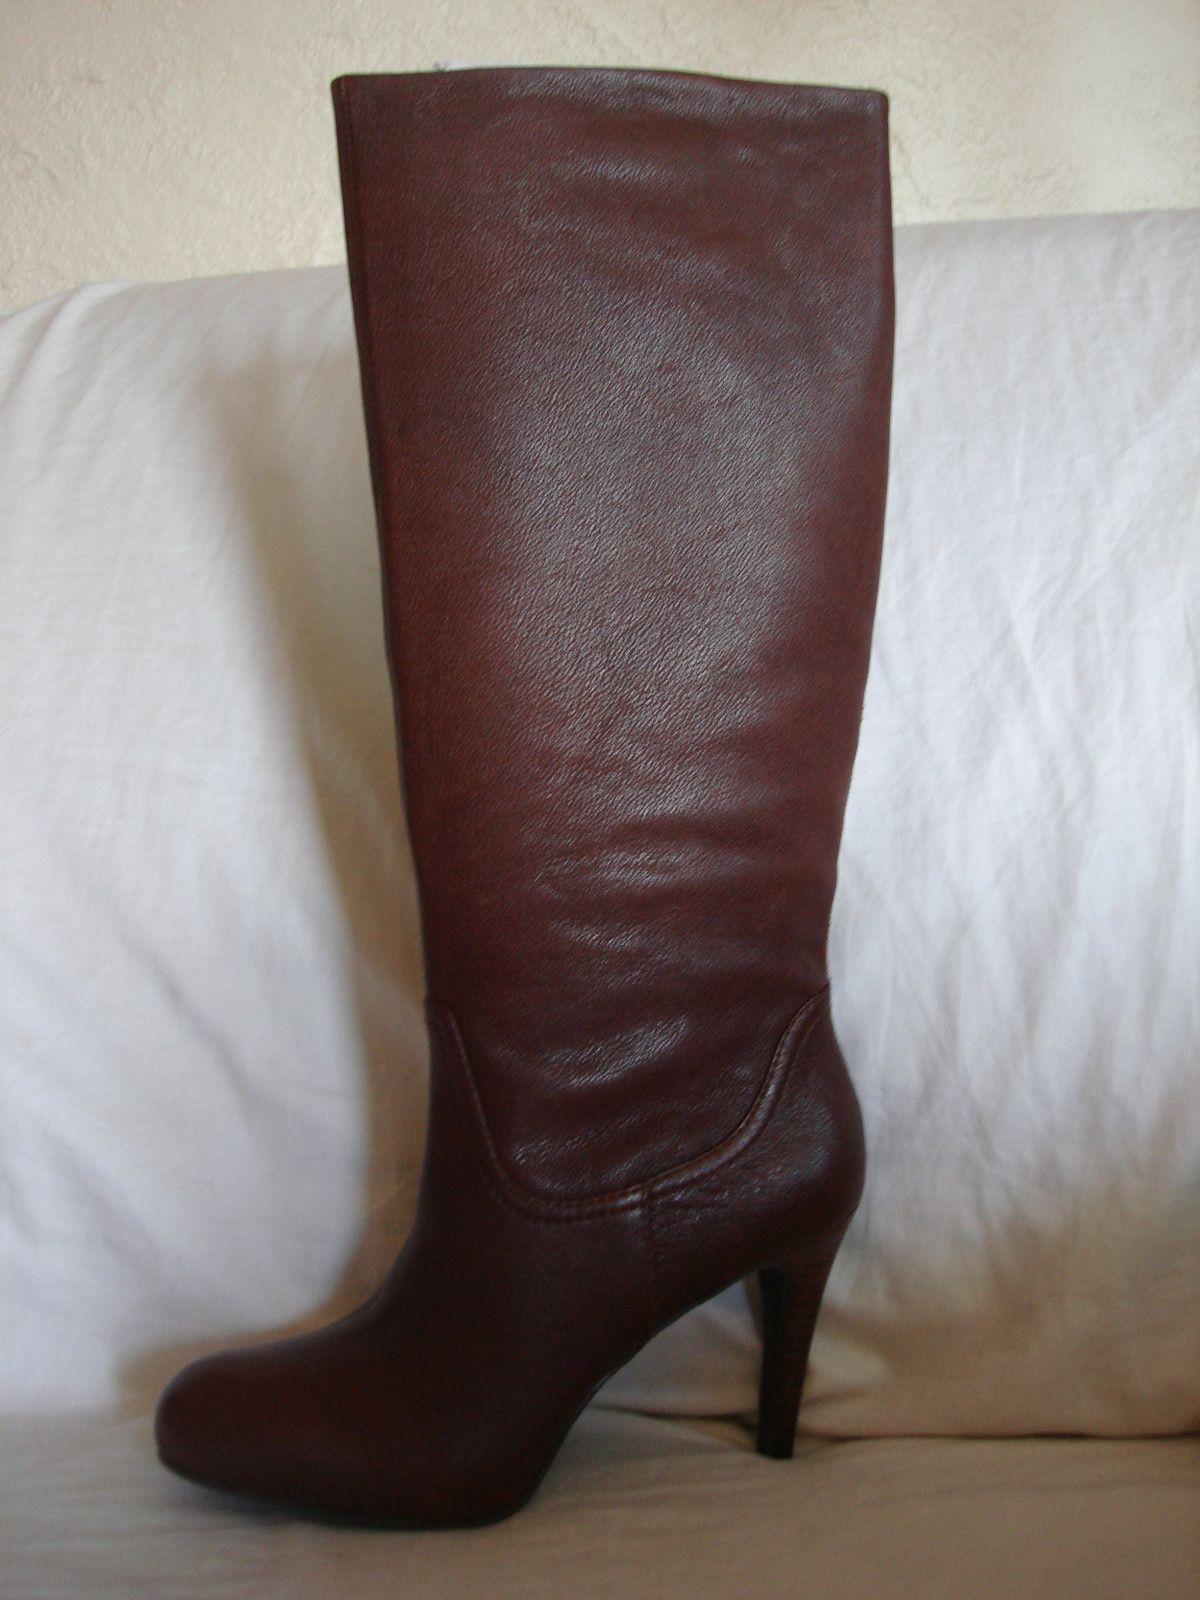 Enzo Angiolini Gibbons Womens Shoes Size 8 5 Brown Boots Knee High